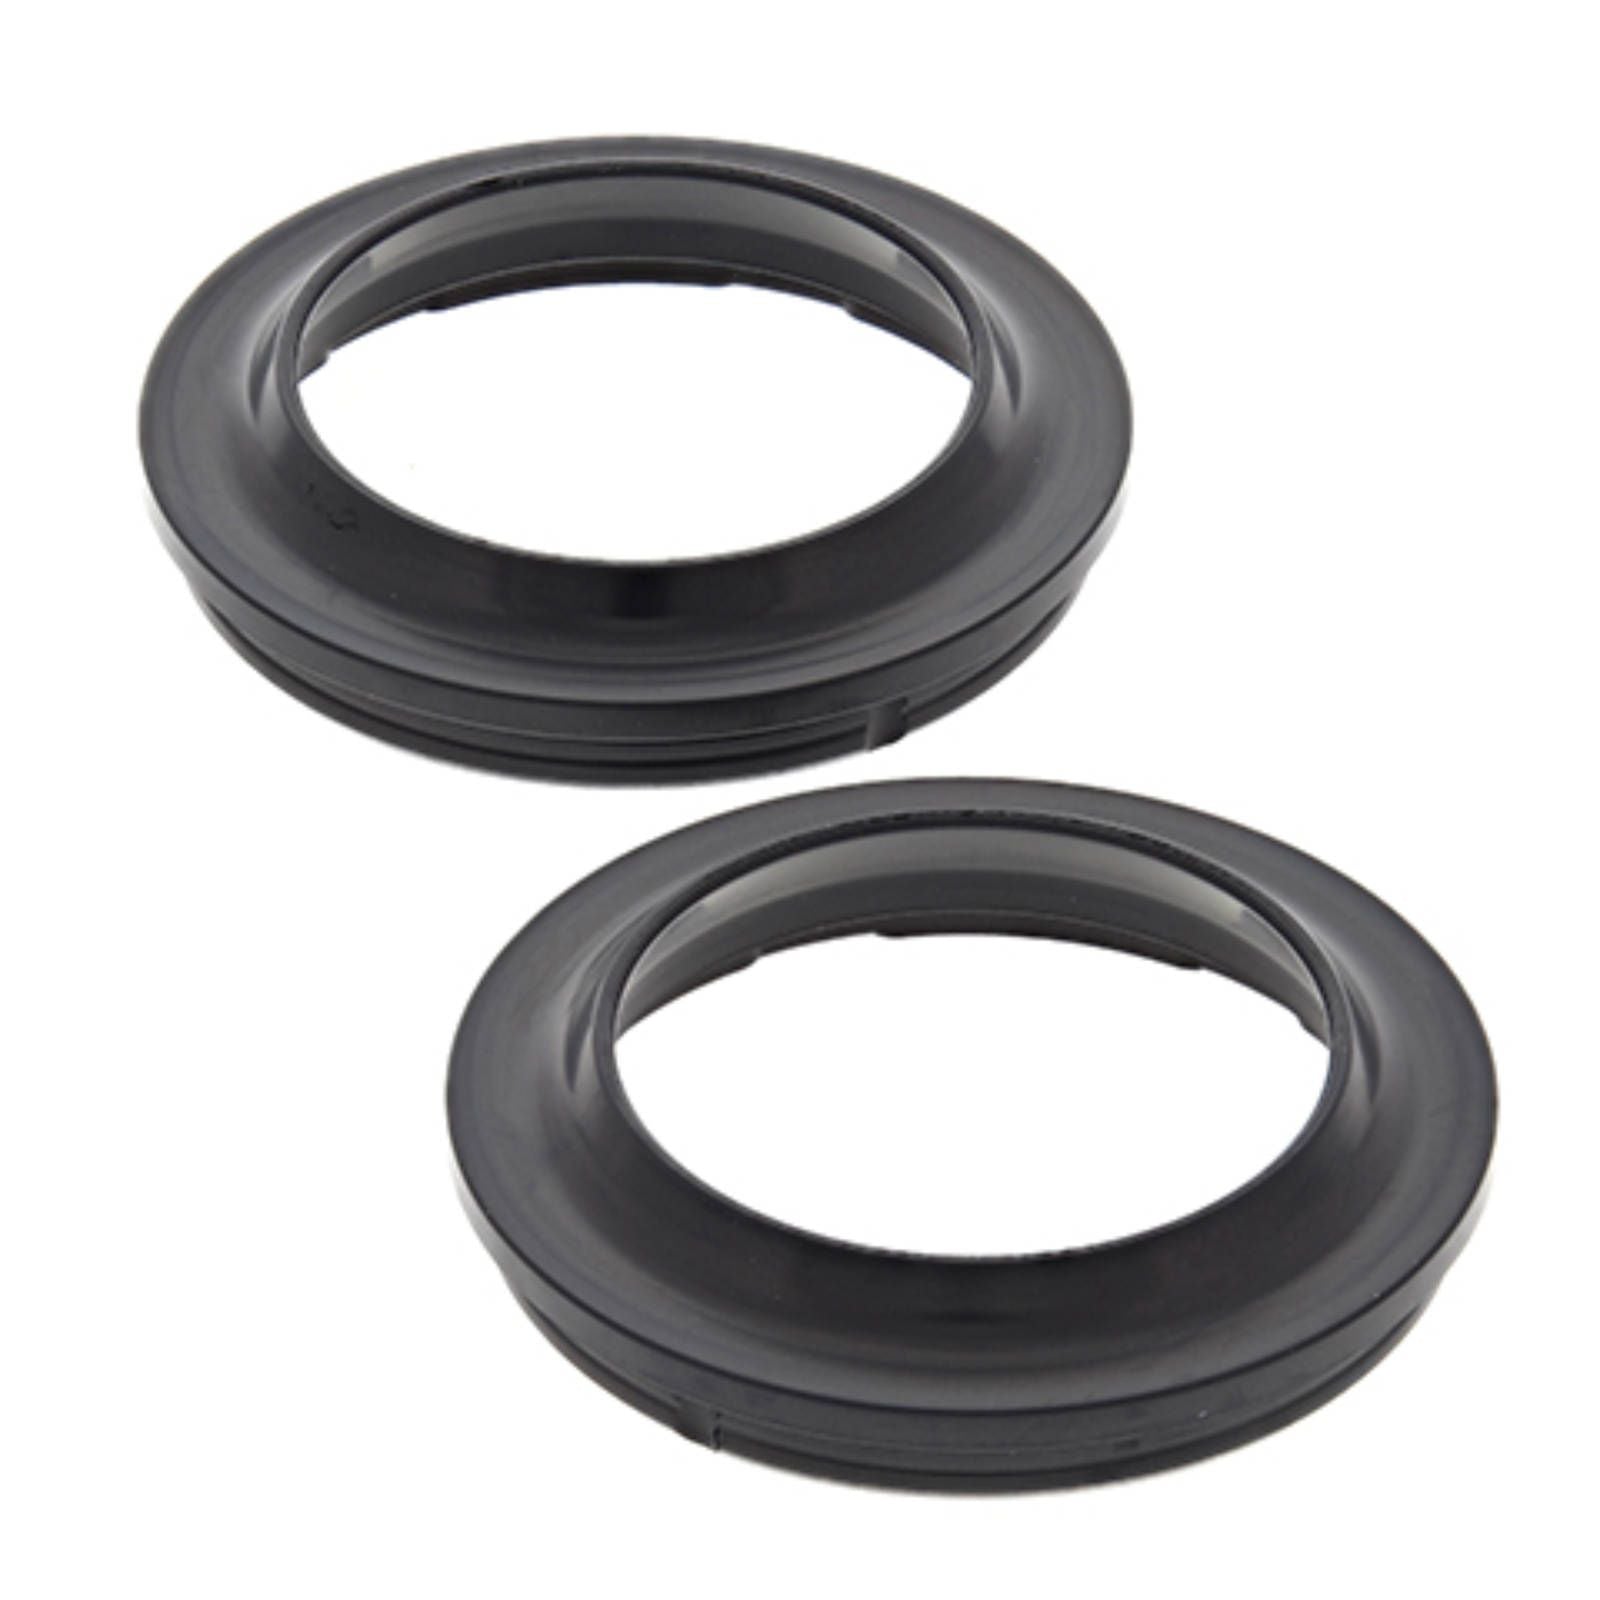 New ALL BALLS Racing Fork Dust Seal Kit #AB57152